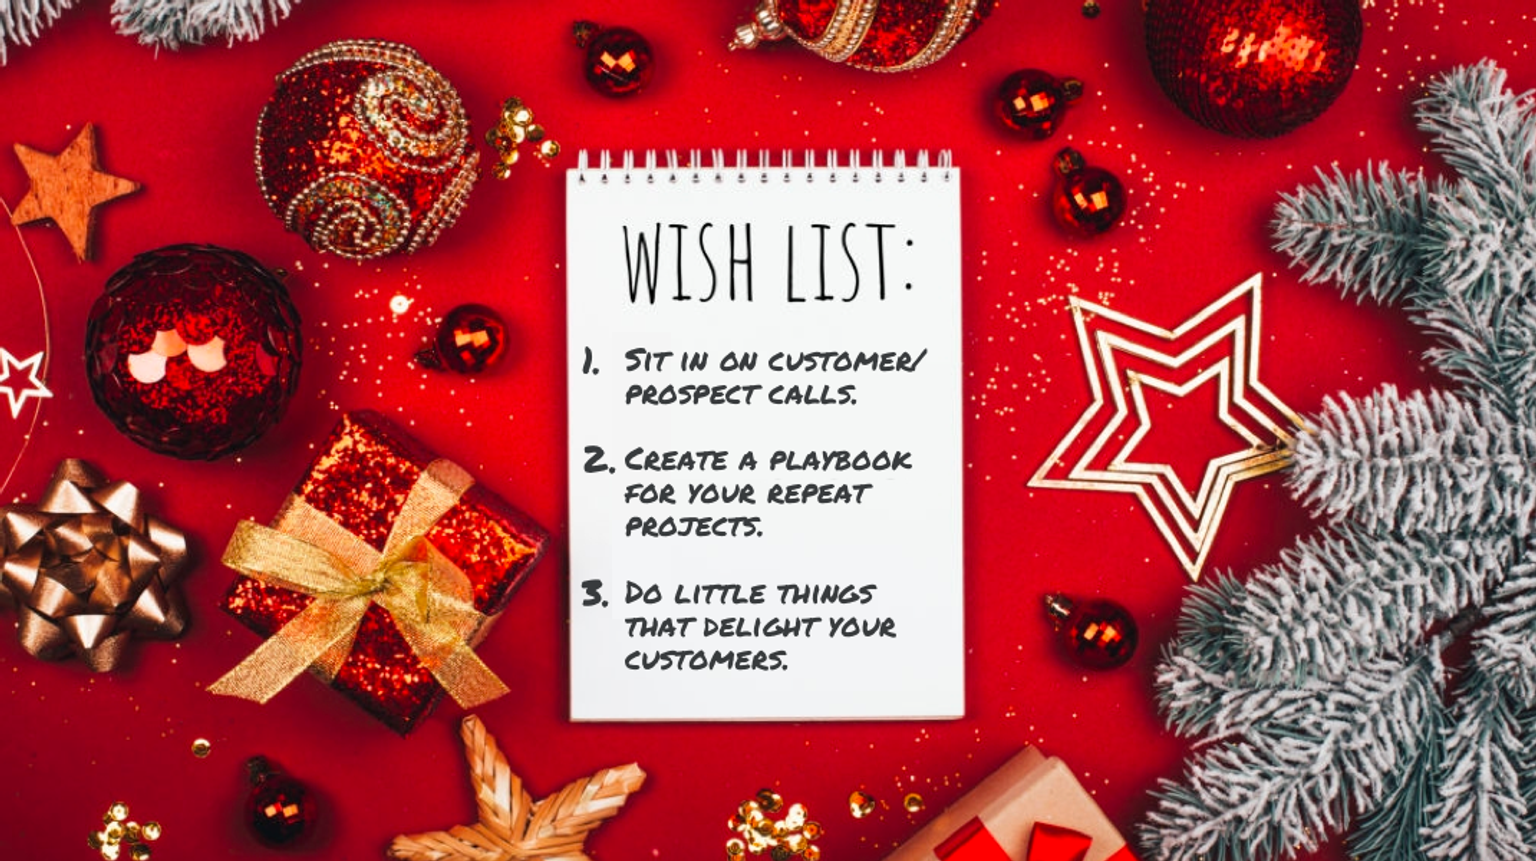 Our Holiday Marketing Wish List